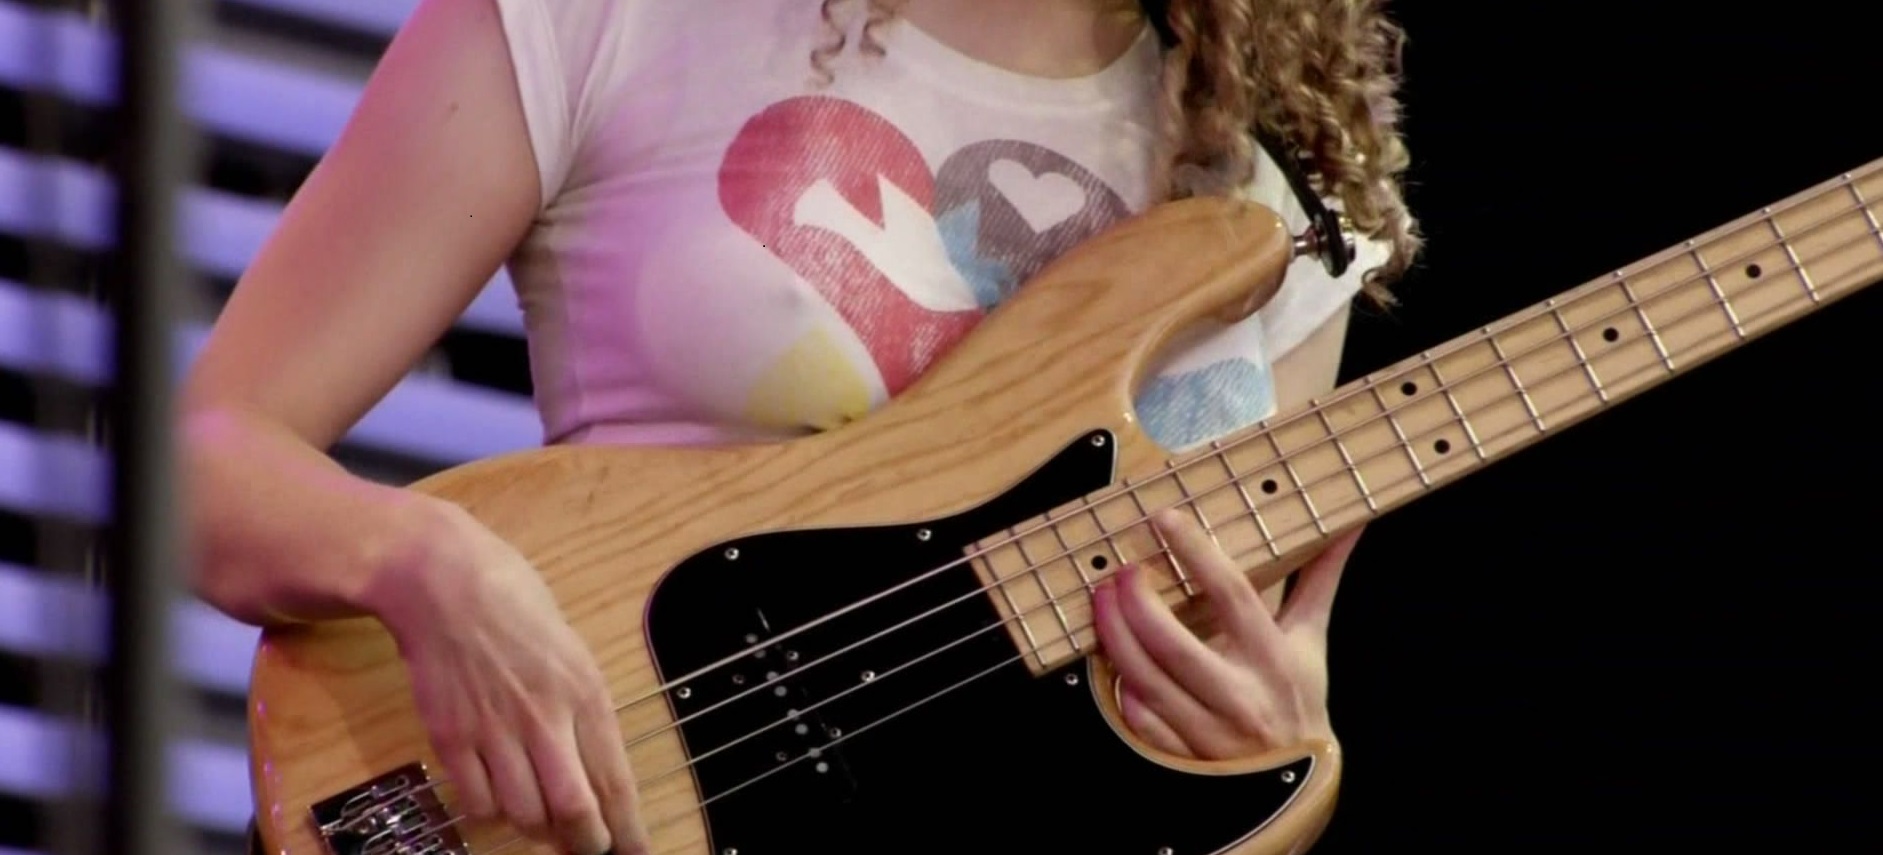 List of my favorite woman bass players